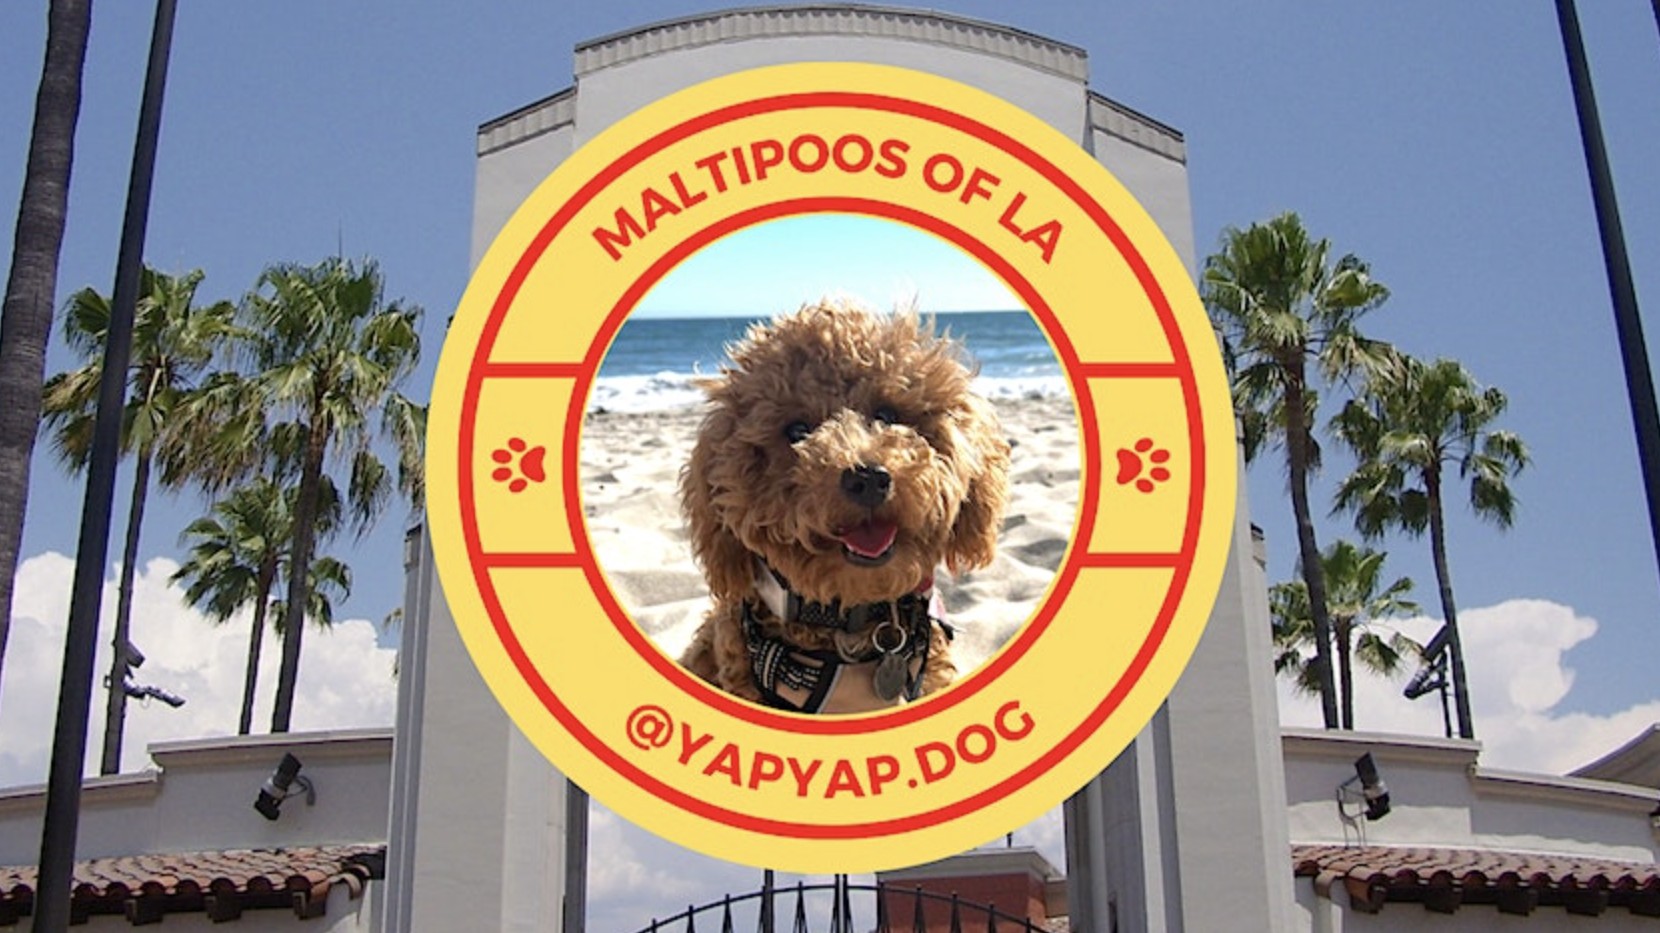 Image of a maltipoo with the words "Maltipoos of LA and @yapyap.dog